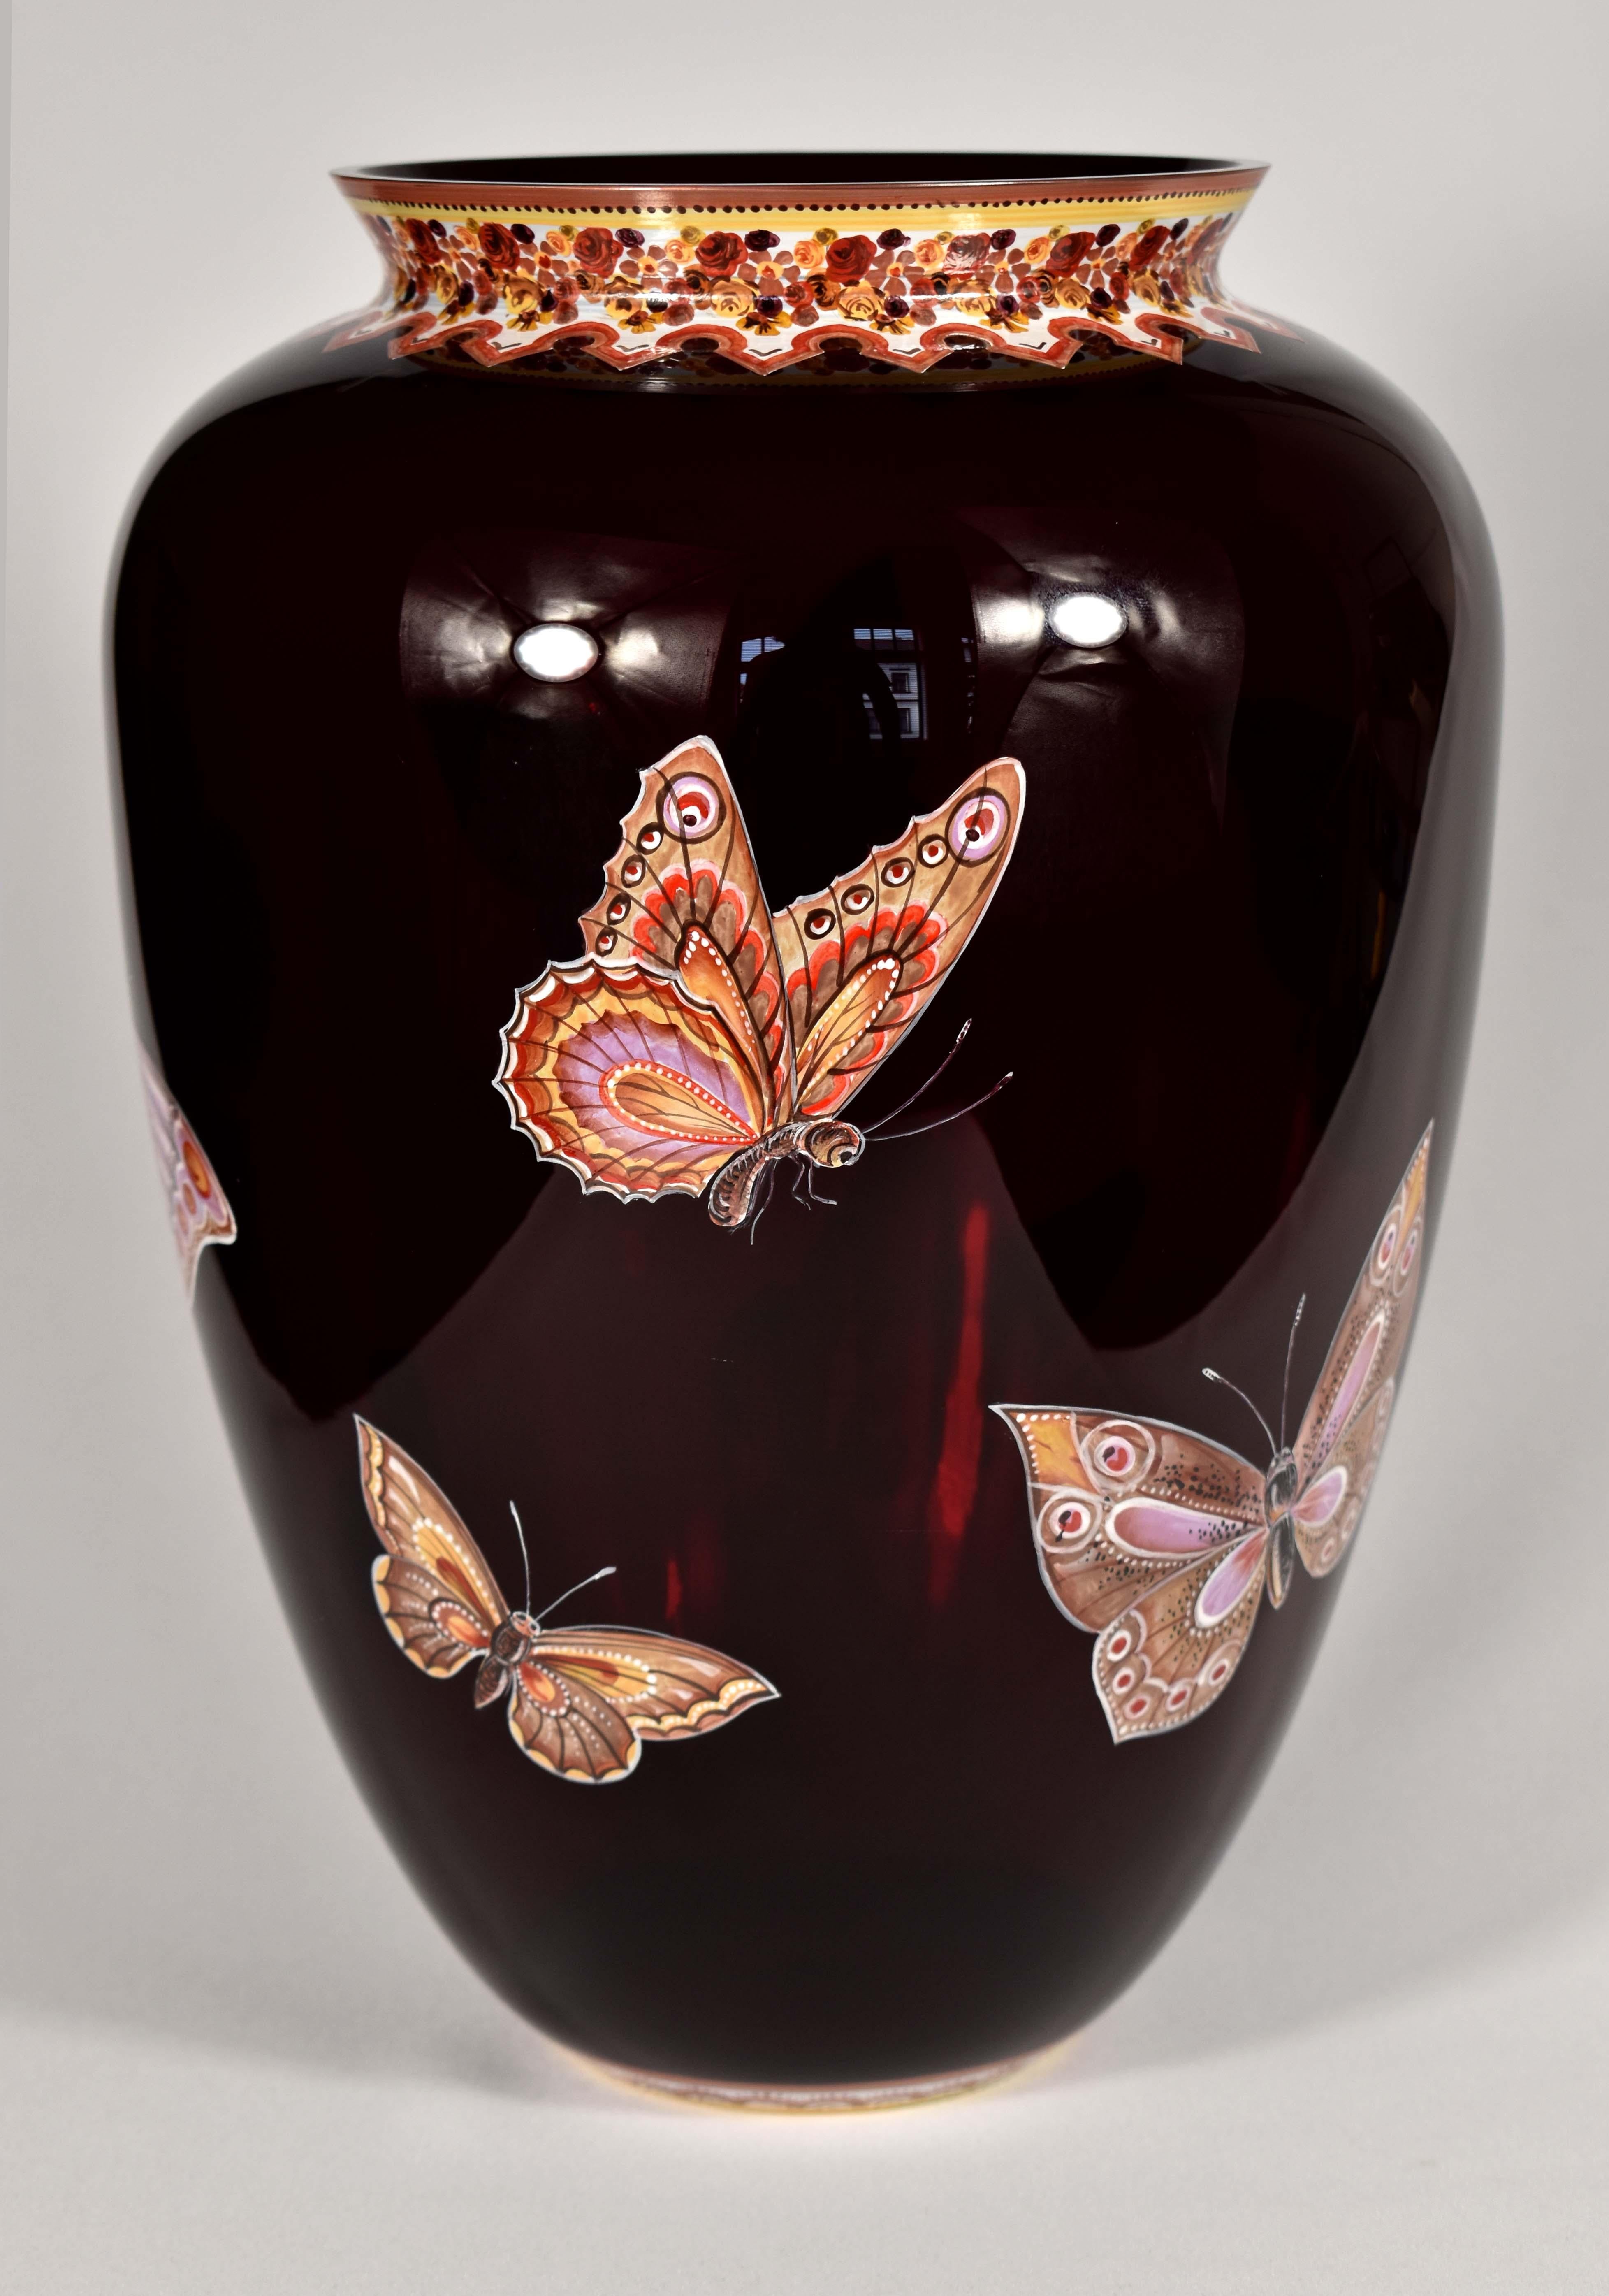 European Ruby Vase with Butterflies, Hand-Painted, Studio Work. Art Glass For Sale